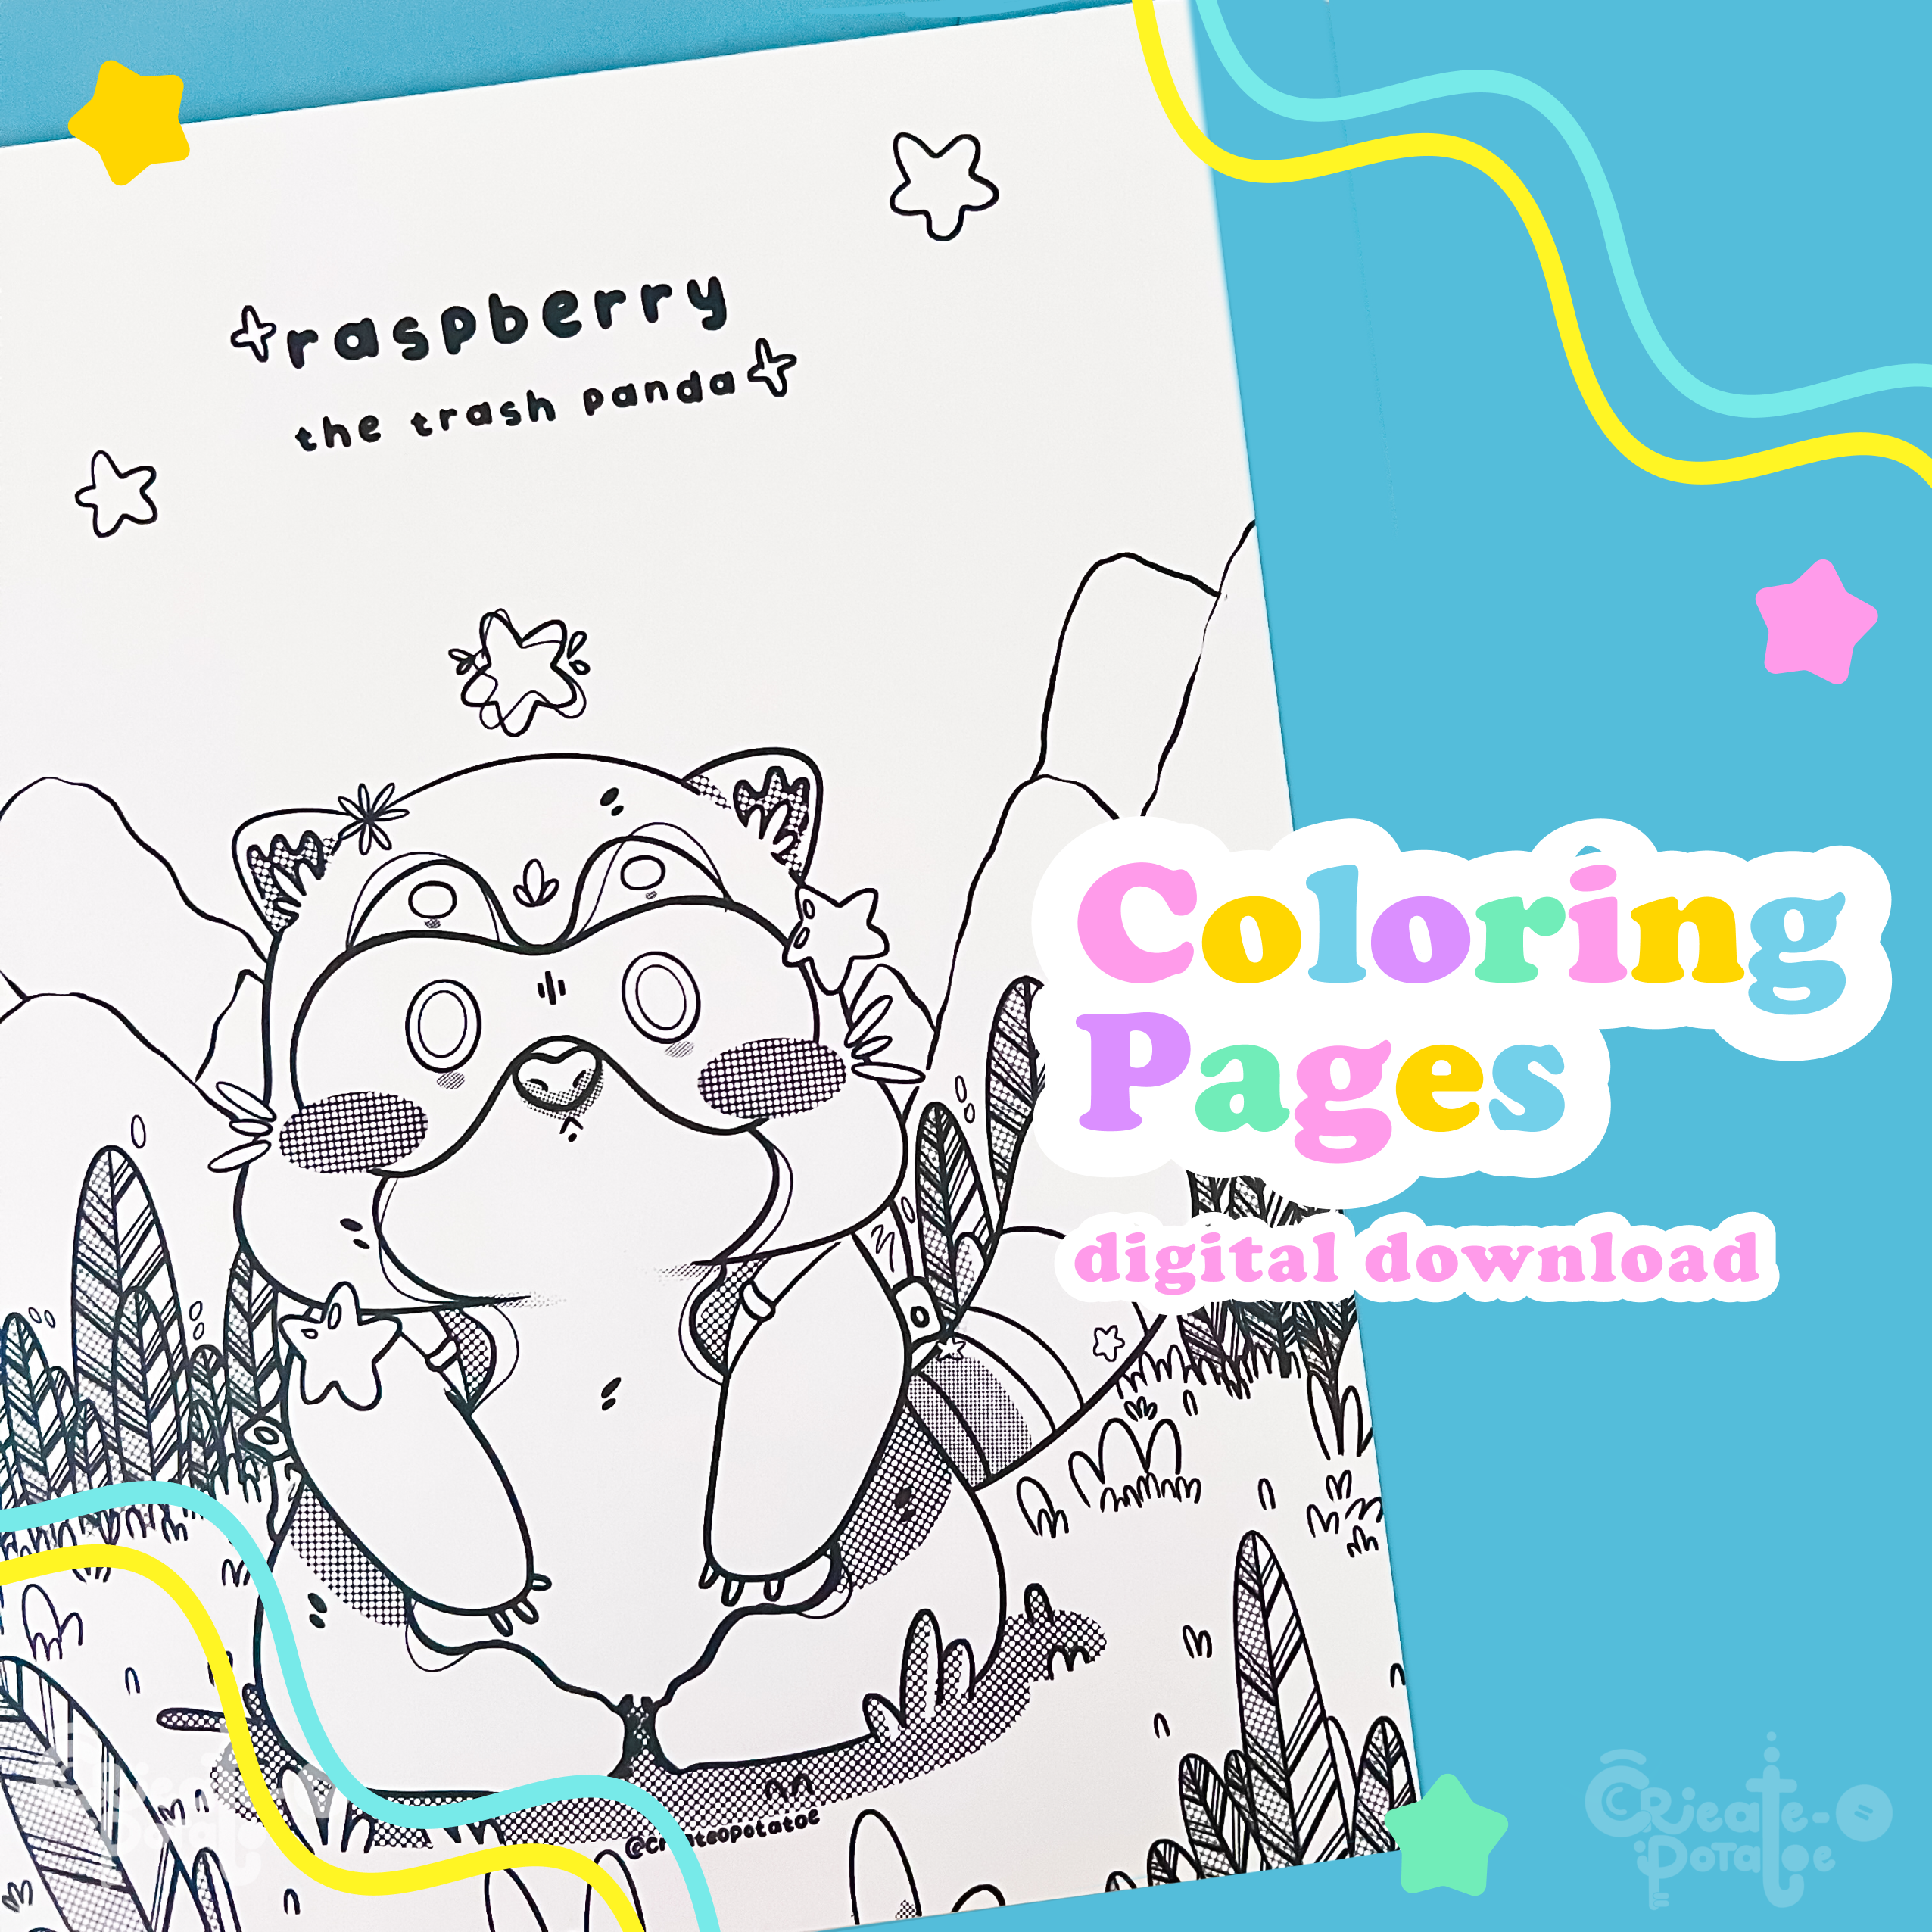 Raspberry the trash panda coloring pages digital download â create